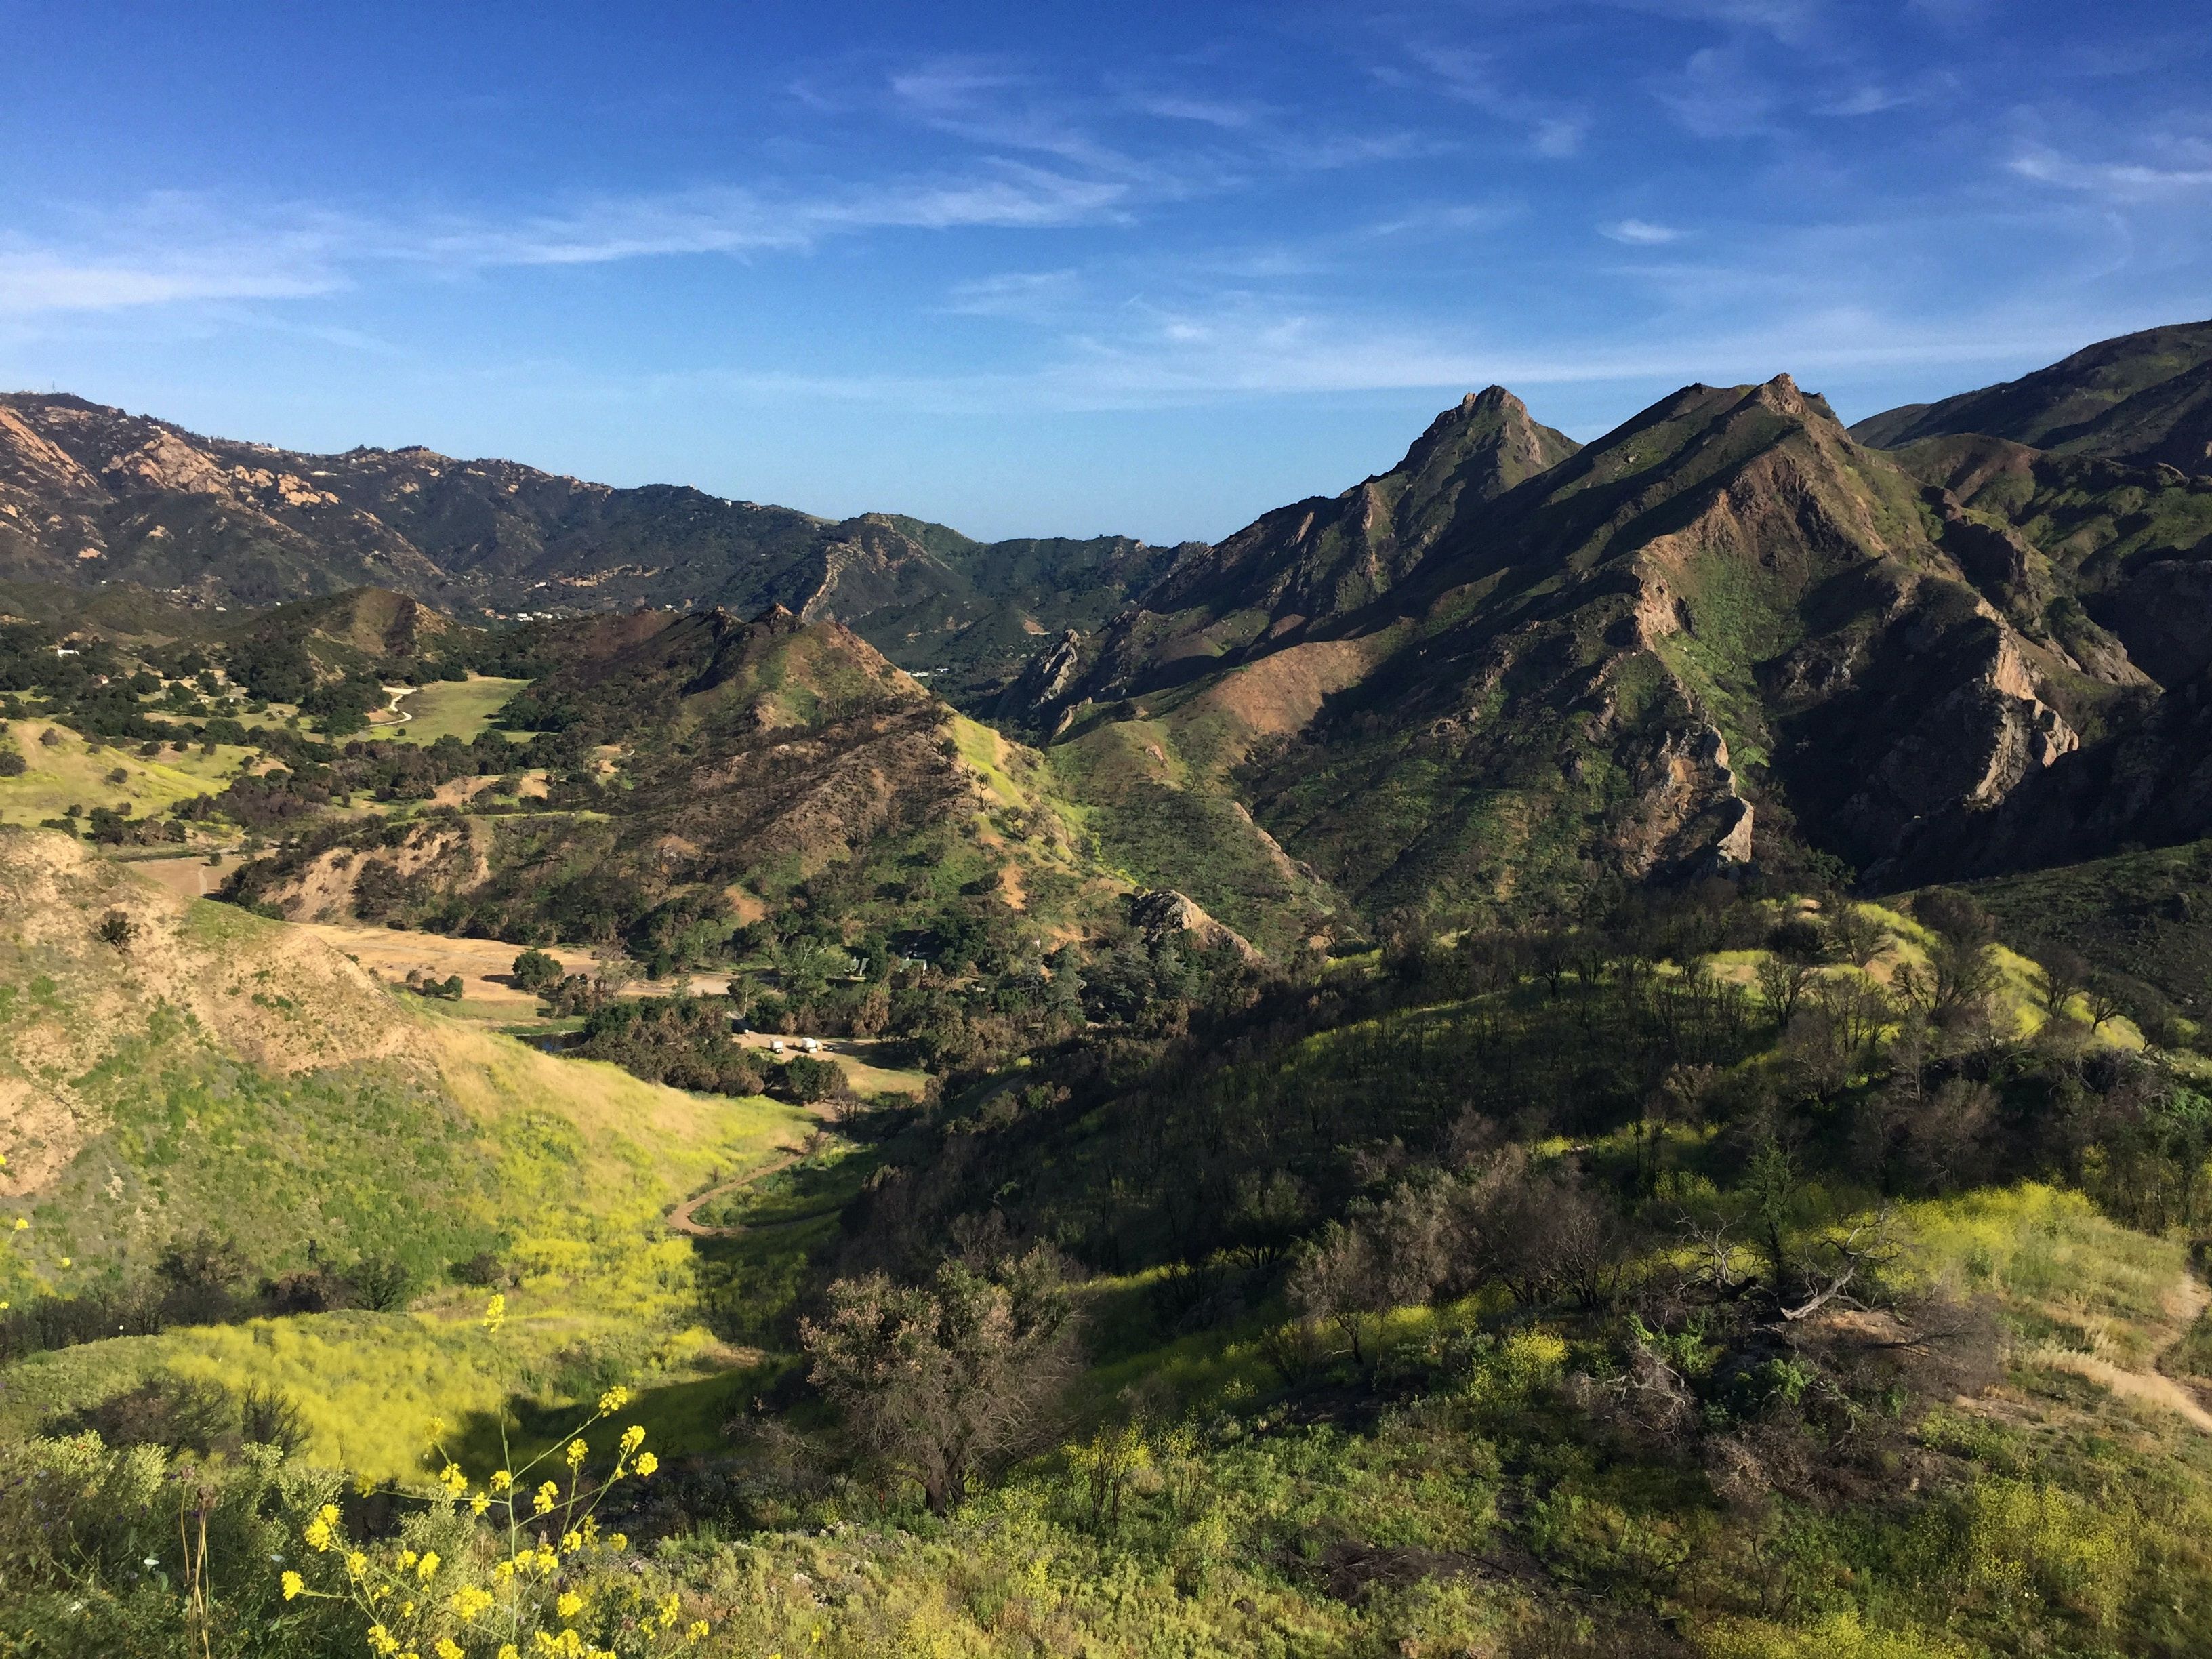 A view of Santa Monica Mountains, a section of the Traverse Ranges, in California, USA